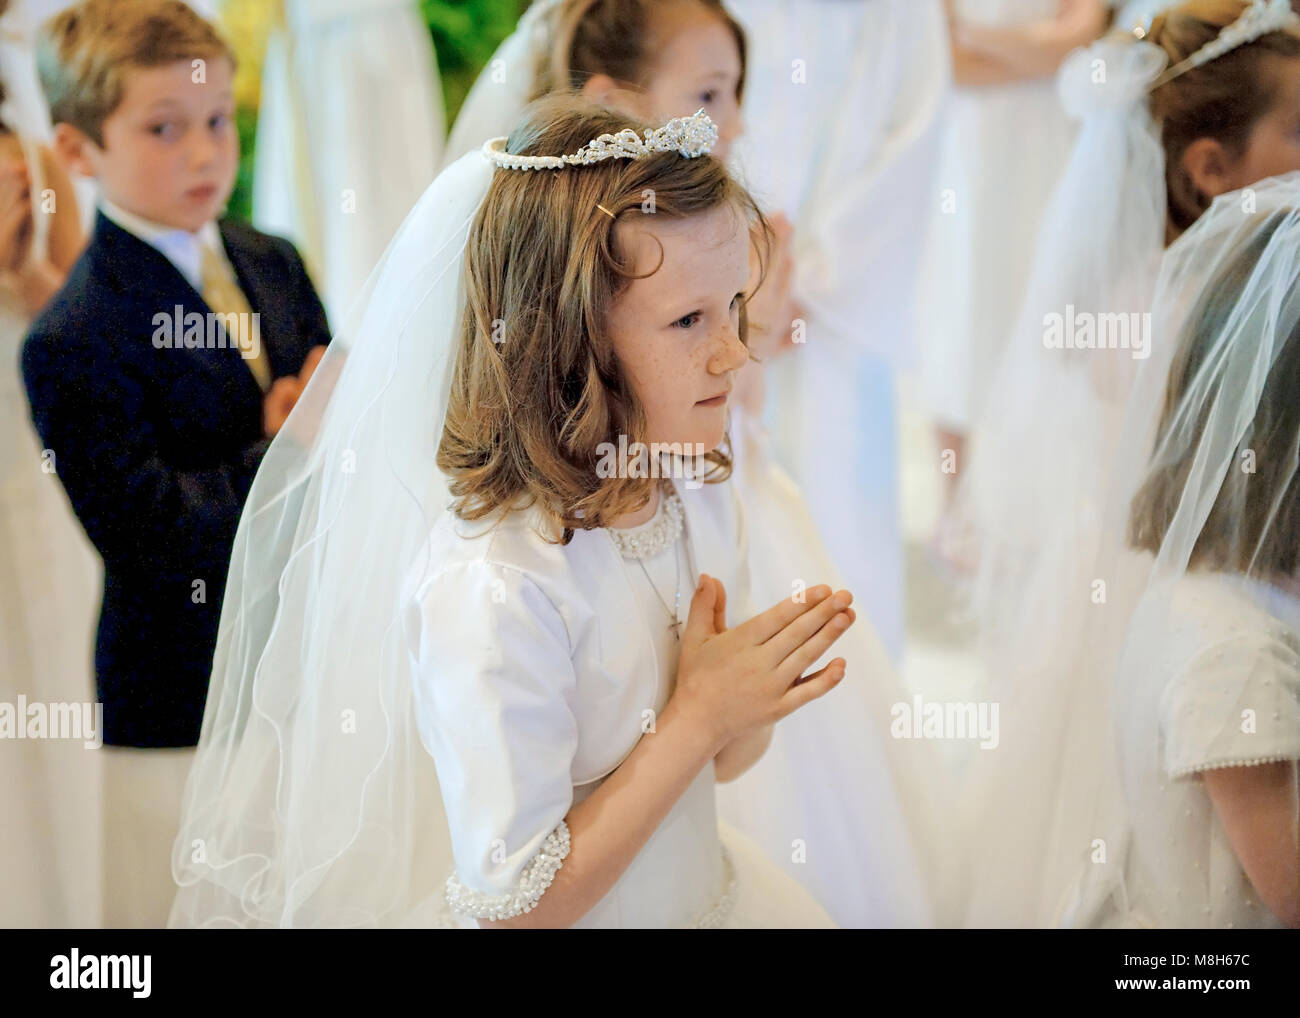 Catholic boys and girls receiving the sacrament of first holy communion. Stock Photo